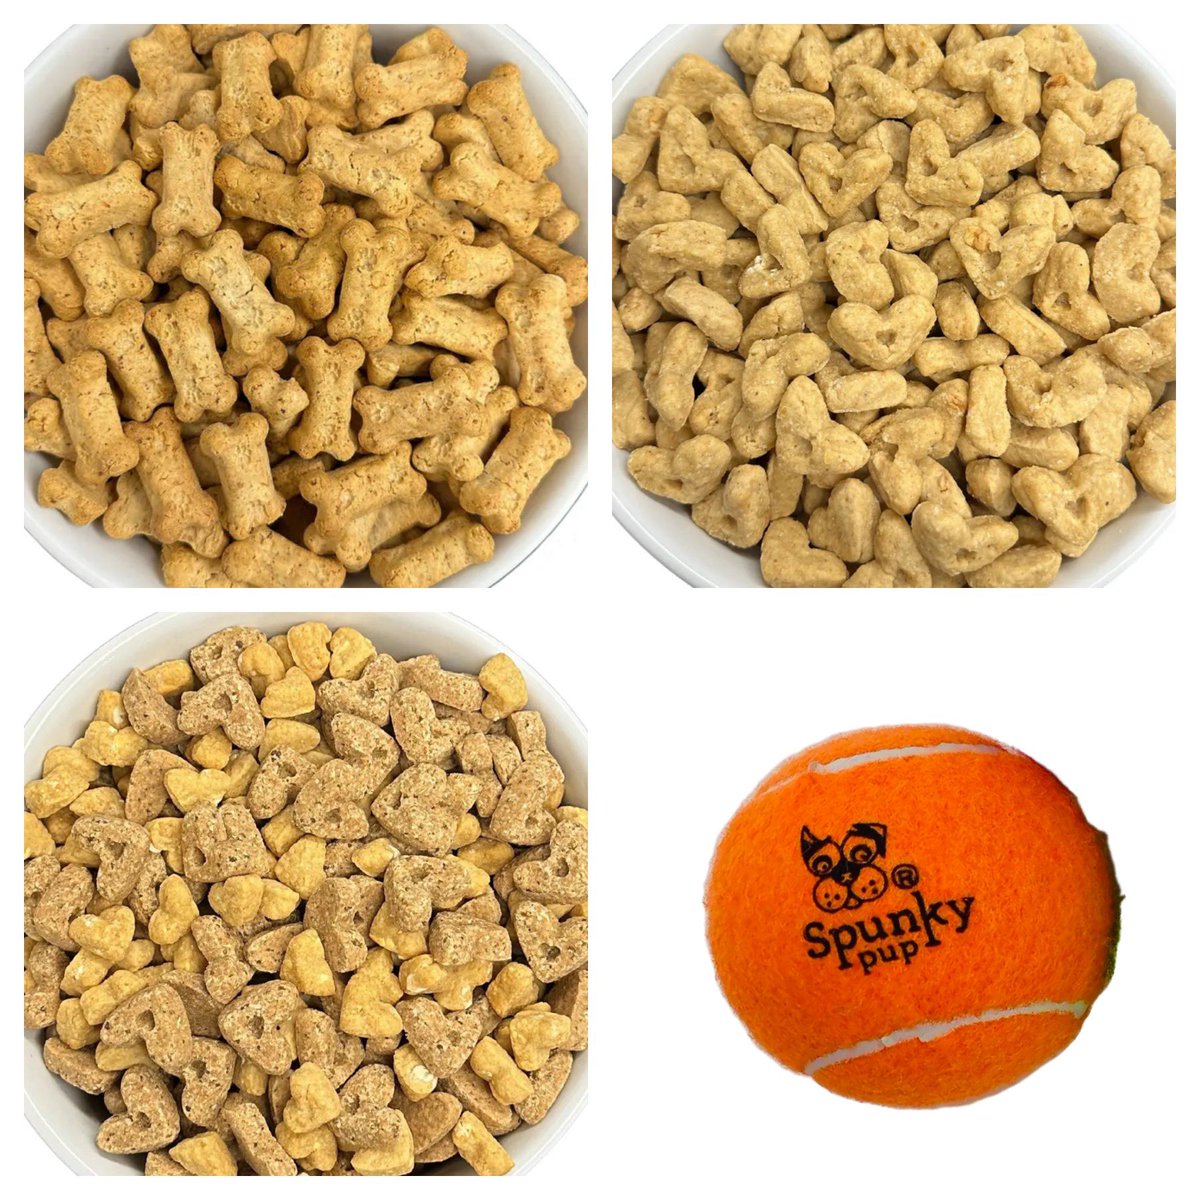 Bark & Beyond Dog Treat Bundle 24 oz. with a FREE 🎾 ball !! Save 15% on Earth 🌎 day with #discountcode EARTHDAY Don’t miss out, order today 👉 barkandbeyondsupply.com/products/bark-… #EarthDay #dogsoftwitter #dogsofx #Mondayvibes #shopsmall @WCrates @Kanethedane10 @Moooo1985 #bundle…